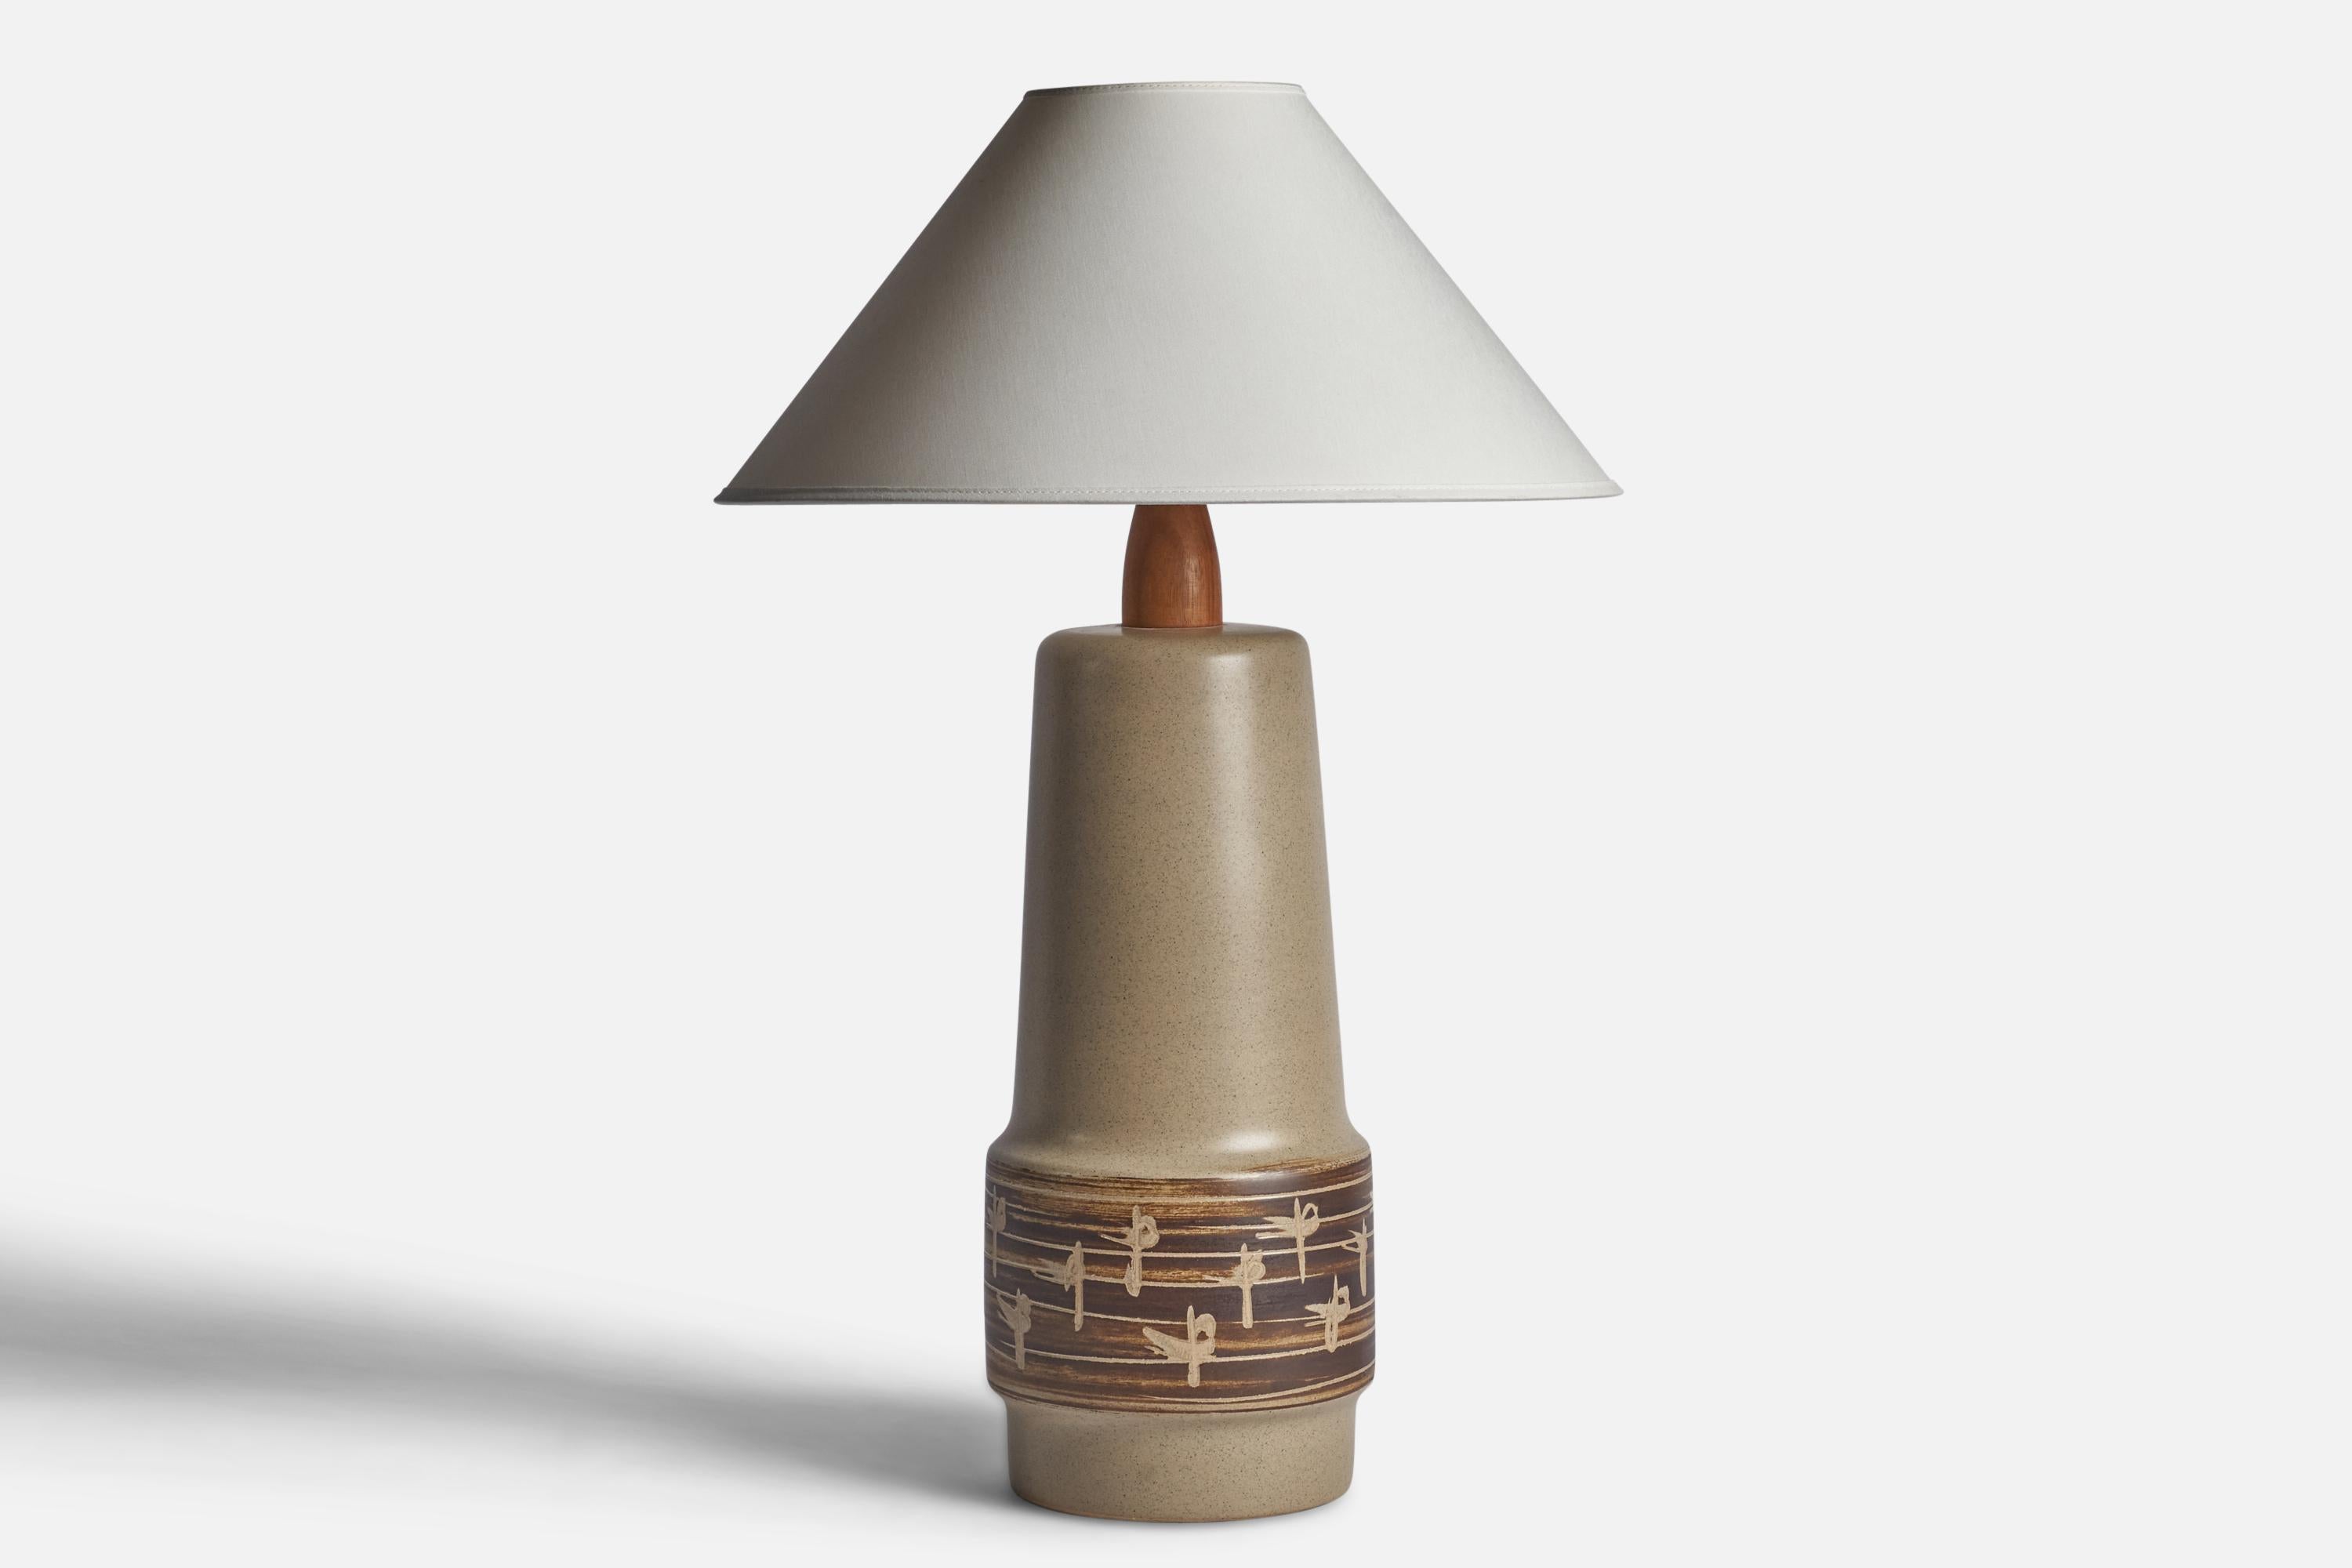 A grey and brown-glazed ceramic and walnut table lamp designed by Jane & Gordon Martz and produced by Marshall Studios, USA, 1960s.

Dimensions of Lamp (inches): 20.75” H x 6.85” Diameter
Dimensions of Shade (inches): 4.5” Top Diameter x 16” Bottom